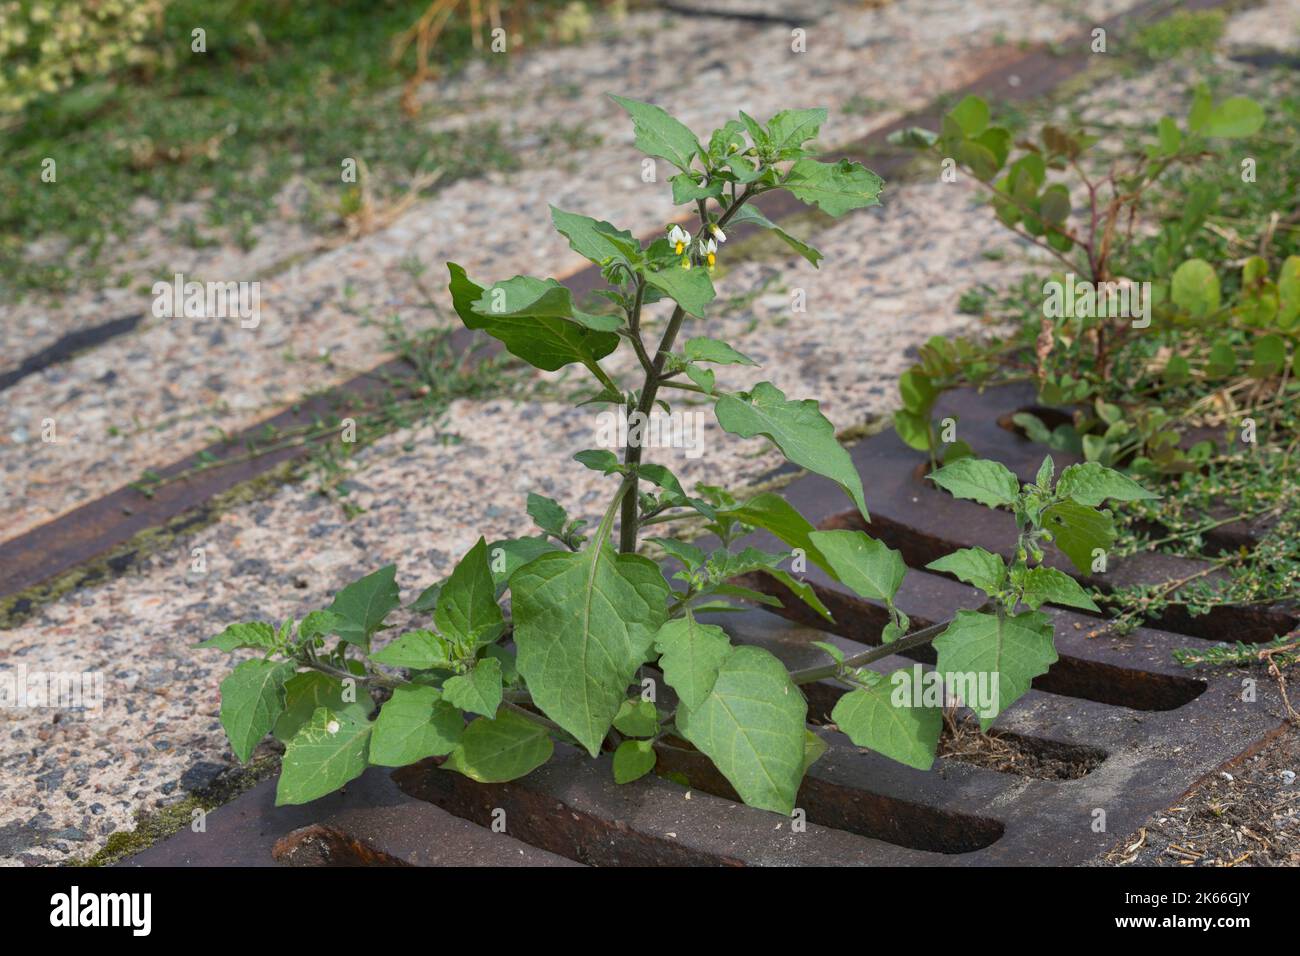 Common nightshade, Black nightshade (Solanum nigrum), growing out of a gully, Germany Stock Photo